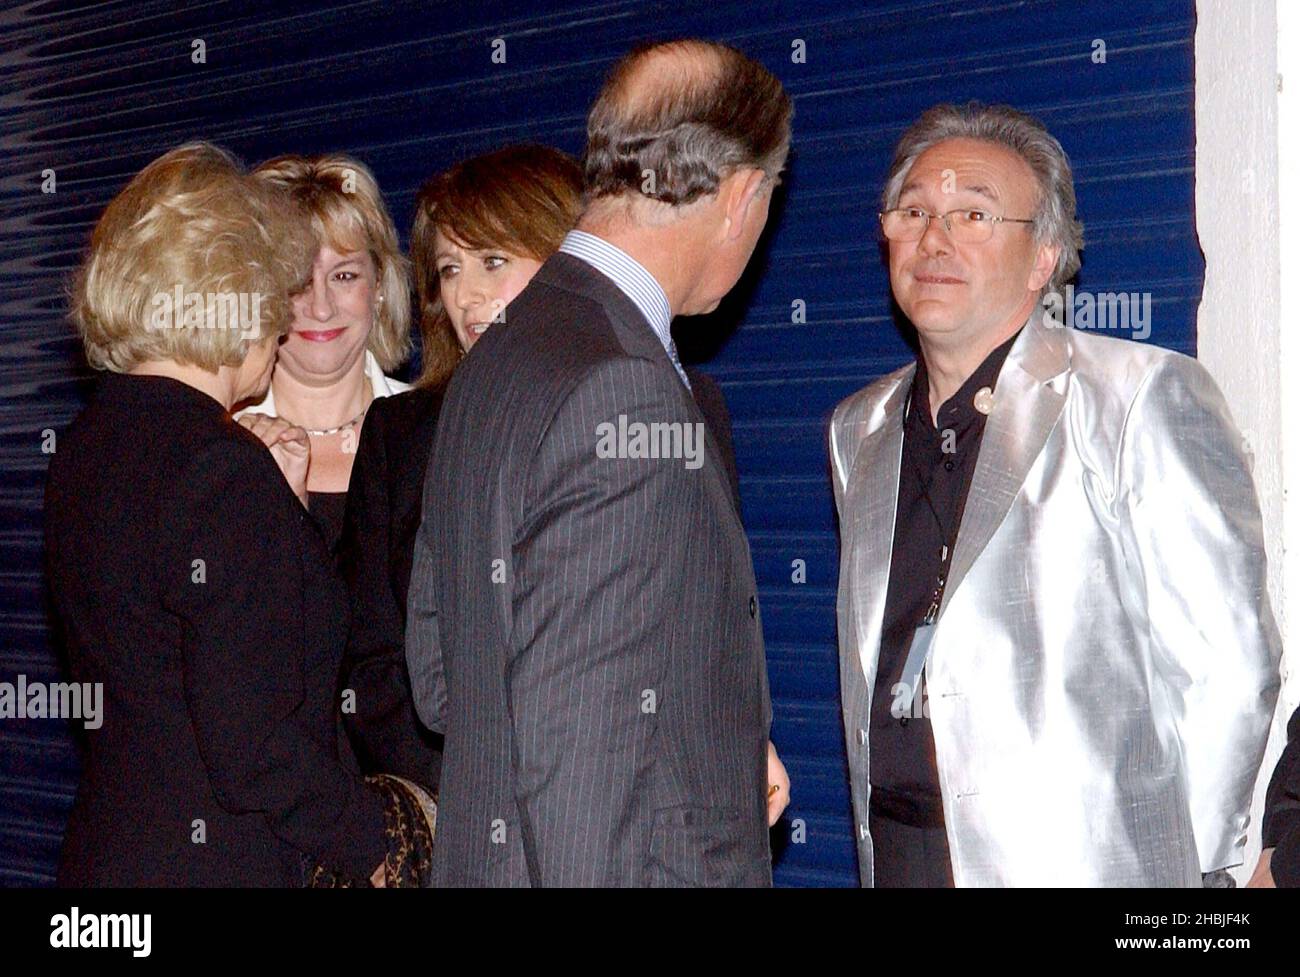 Prince Of Wales greets Trevoe Horn and Camilla Parker Bowles greets Mrs Trevor Horn at the Trevor Horn/Princes Trust concert, Wembley Arena, London. Stock Photo